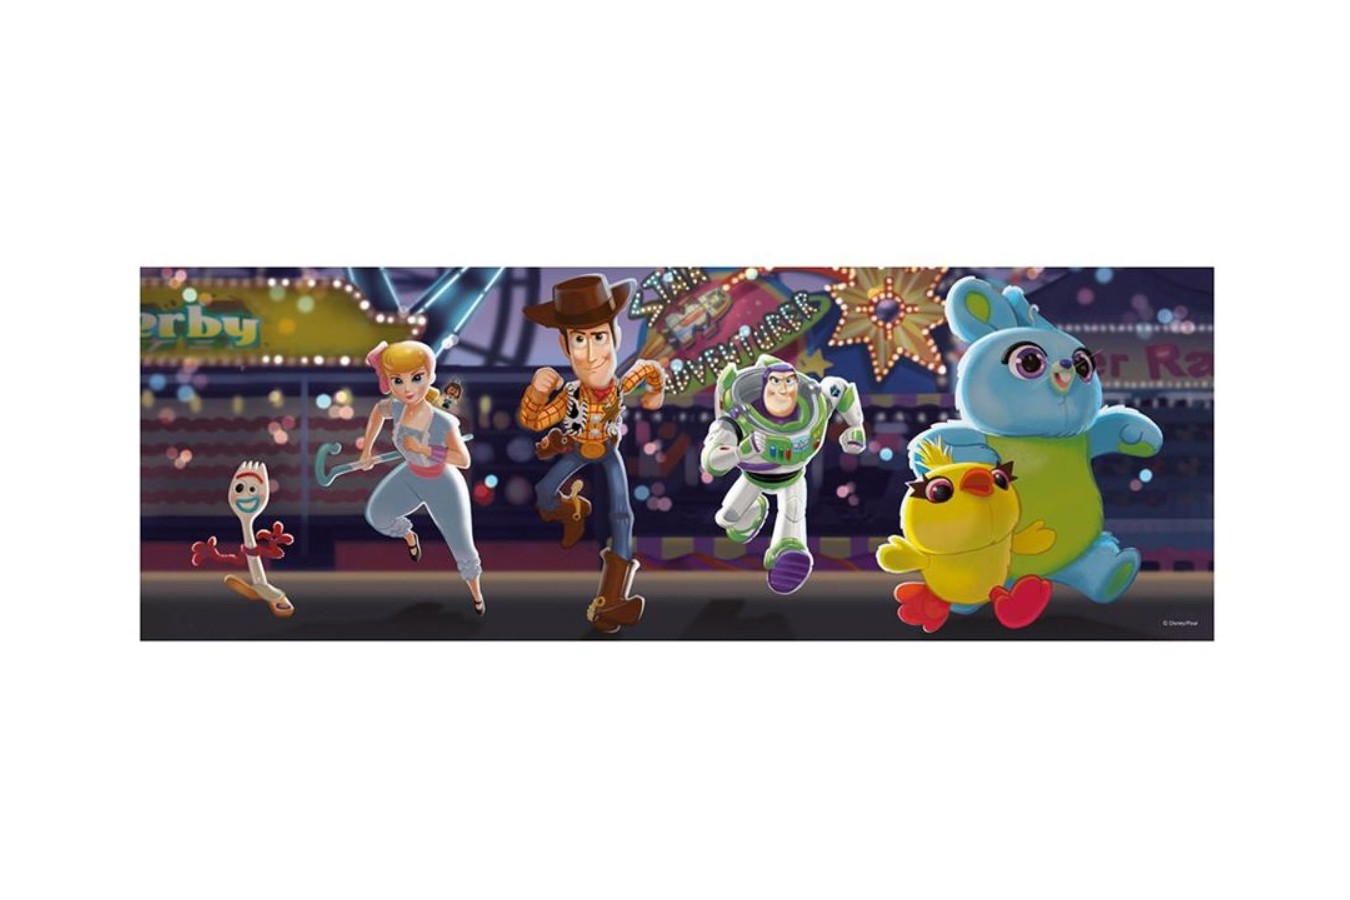 Puzzle panoramic Dino - Toy Story 4, 150 piese (39328)